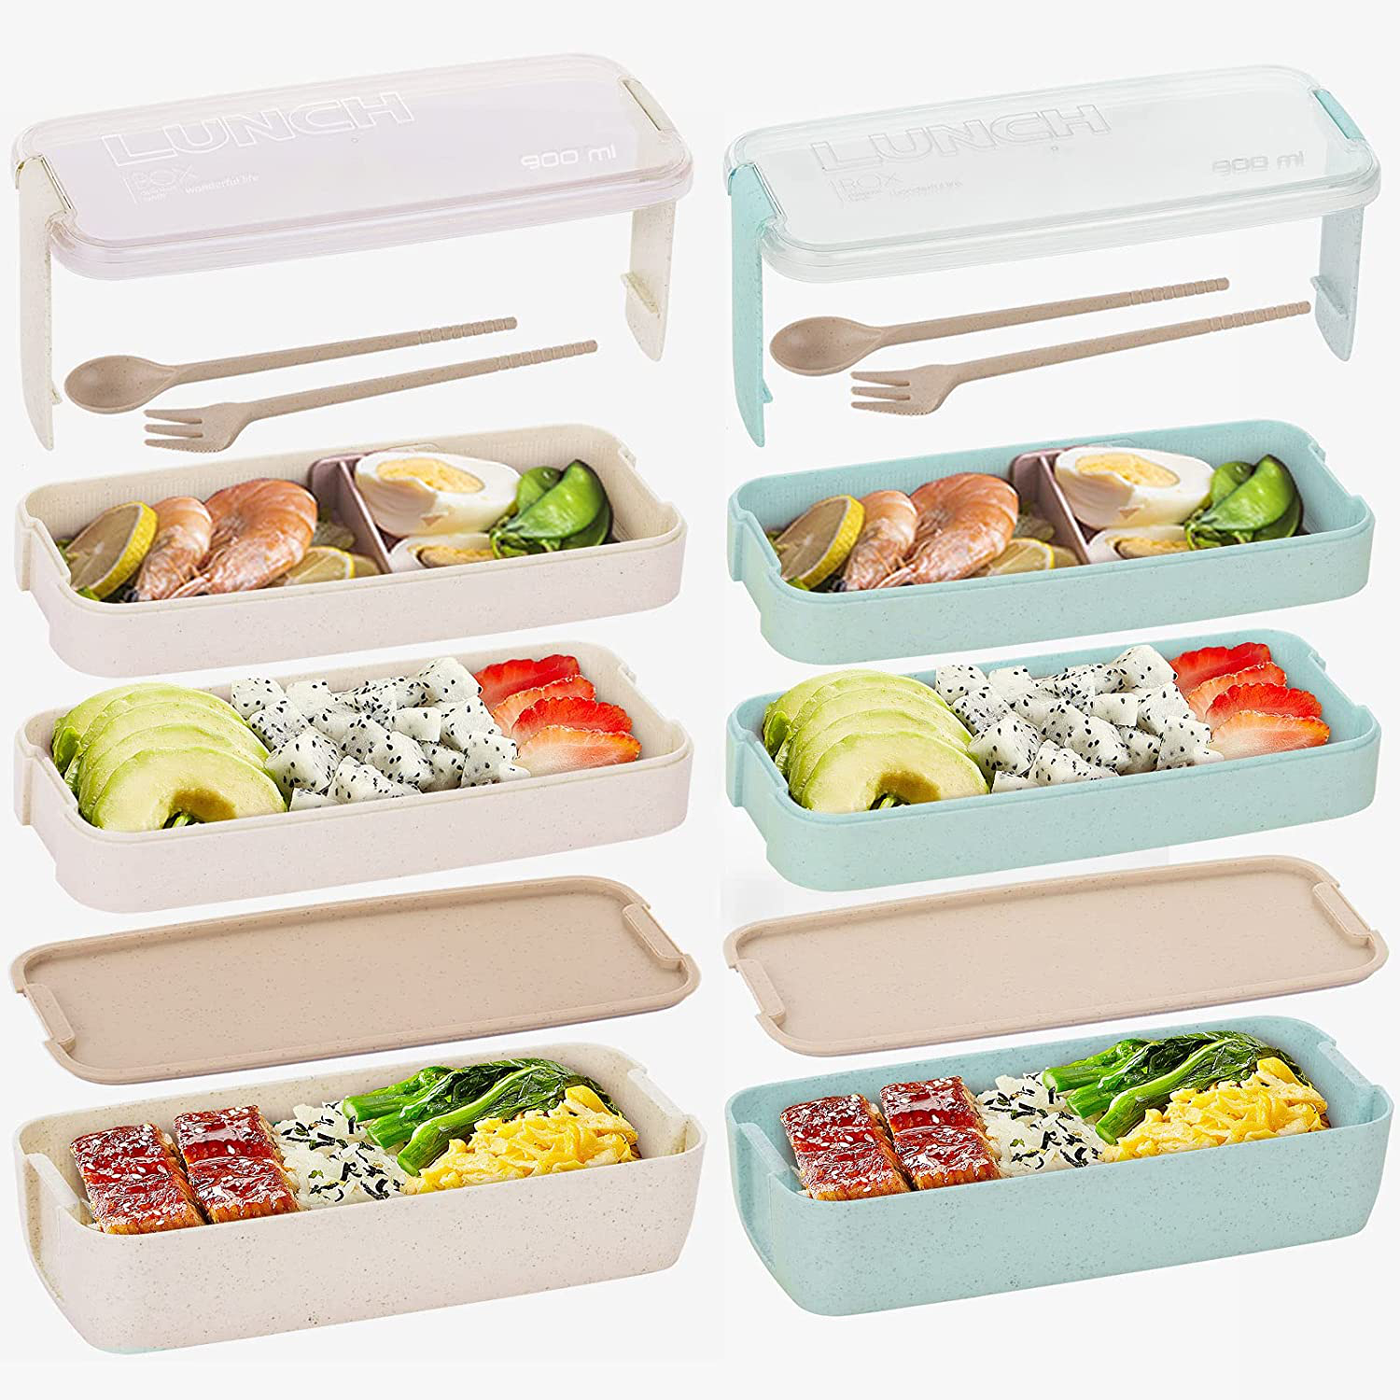 Bento Box for Kids Lunch Boxes Adults 3-In-1 Meal Prep Container, 900ML Janpanese Lunch Box with 3 Layer Compartment, Wheat Straw, Leak-proof, Spoon Fork, Lunch Bag with Soup Cup, BPA-free, Beige